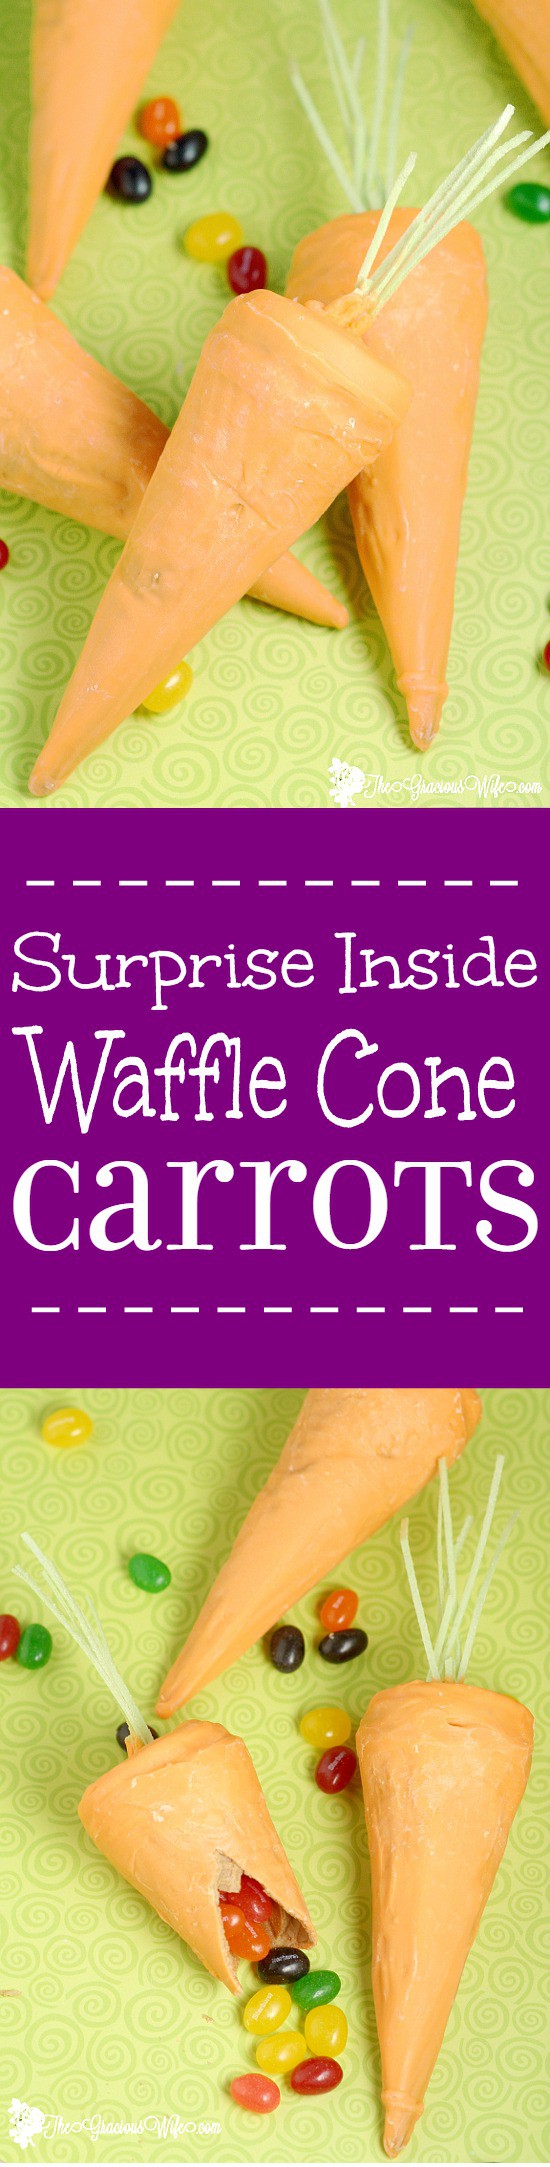 Surprise Inside Waffle Cone Carrots are a perfect Easter or Spring-time treat, and a fun idea for kids. These are so cute! Can't believe the supplies are so simple!